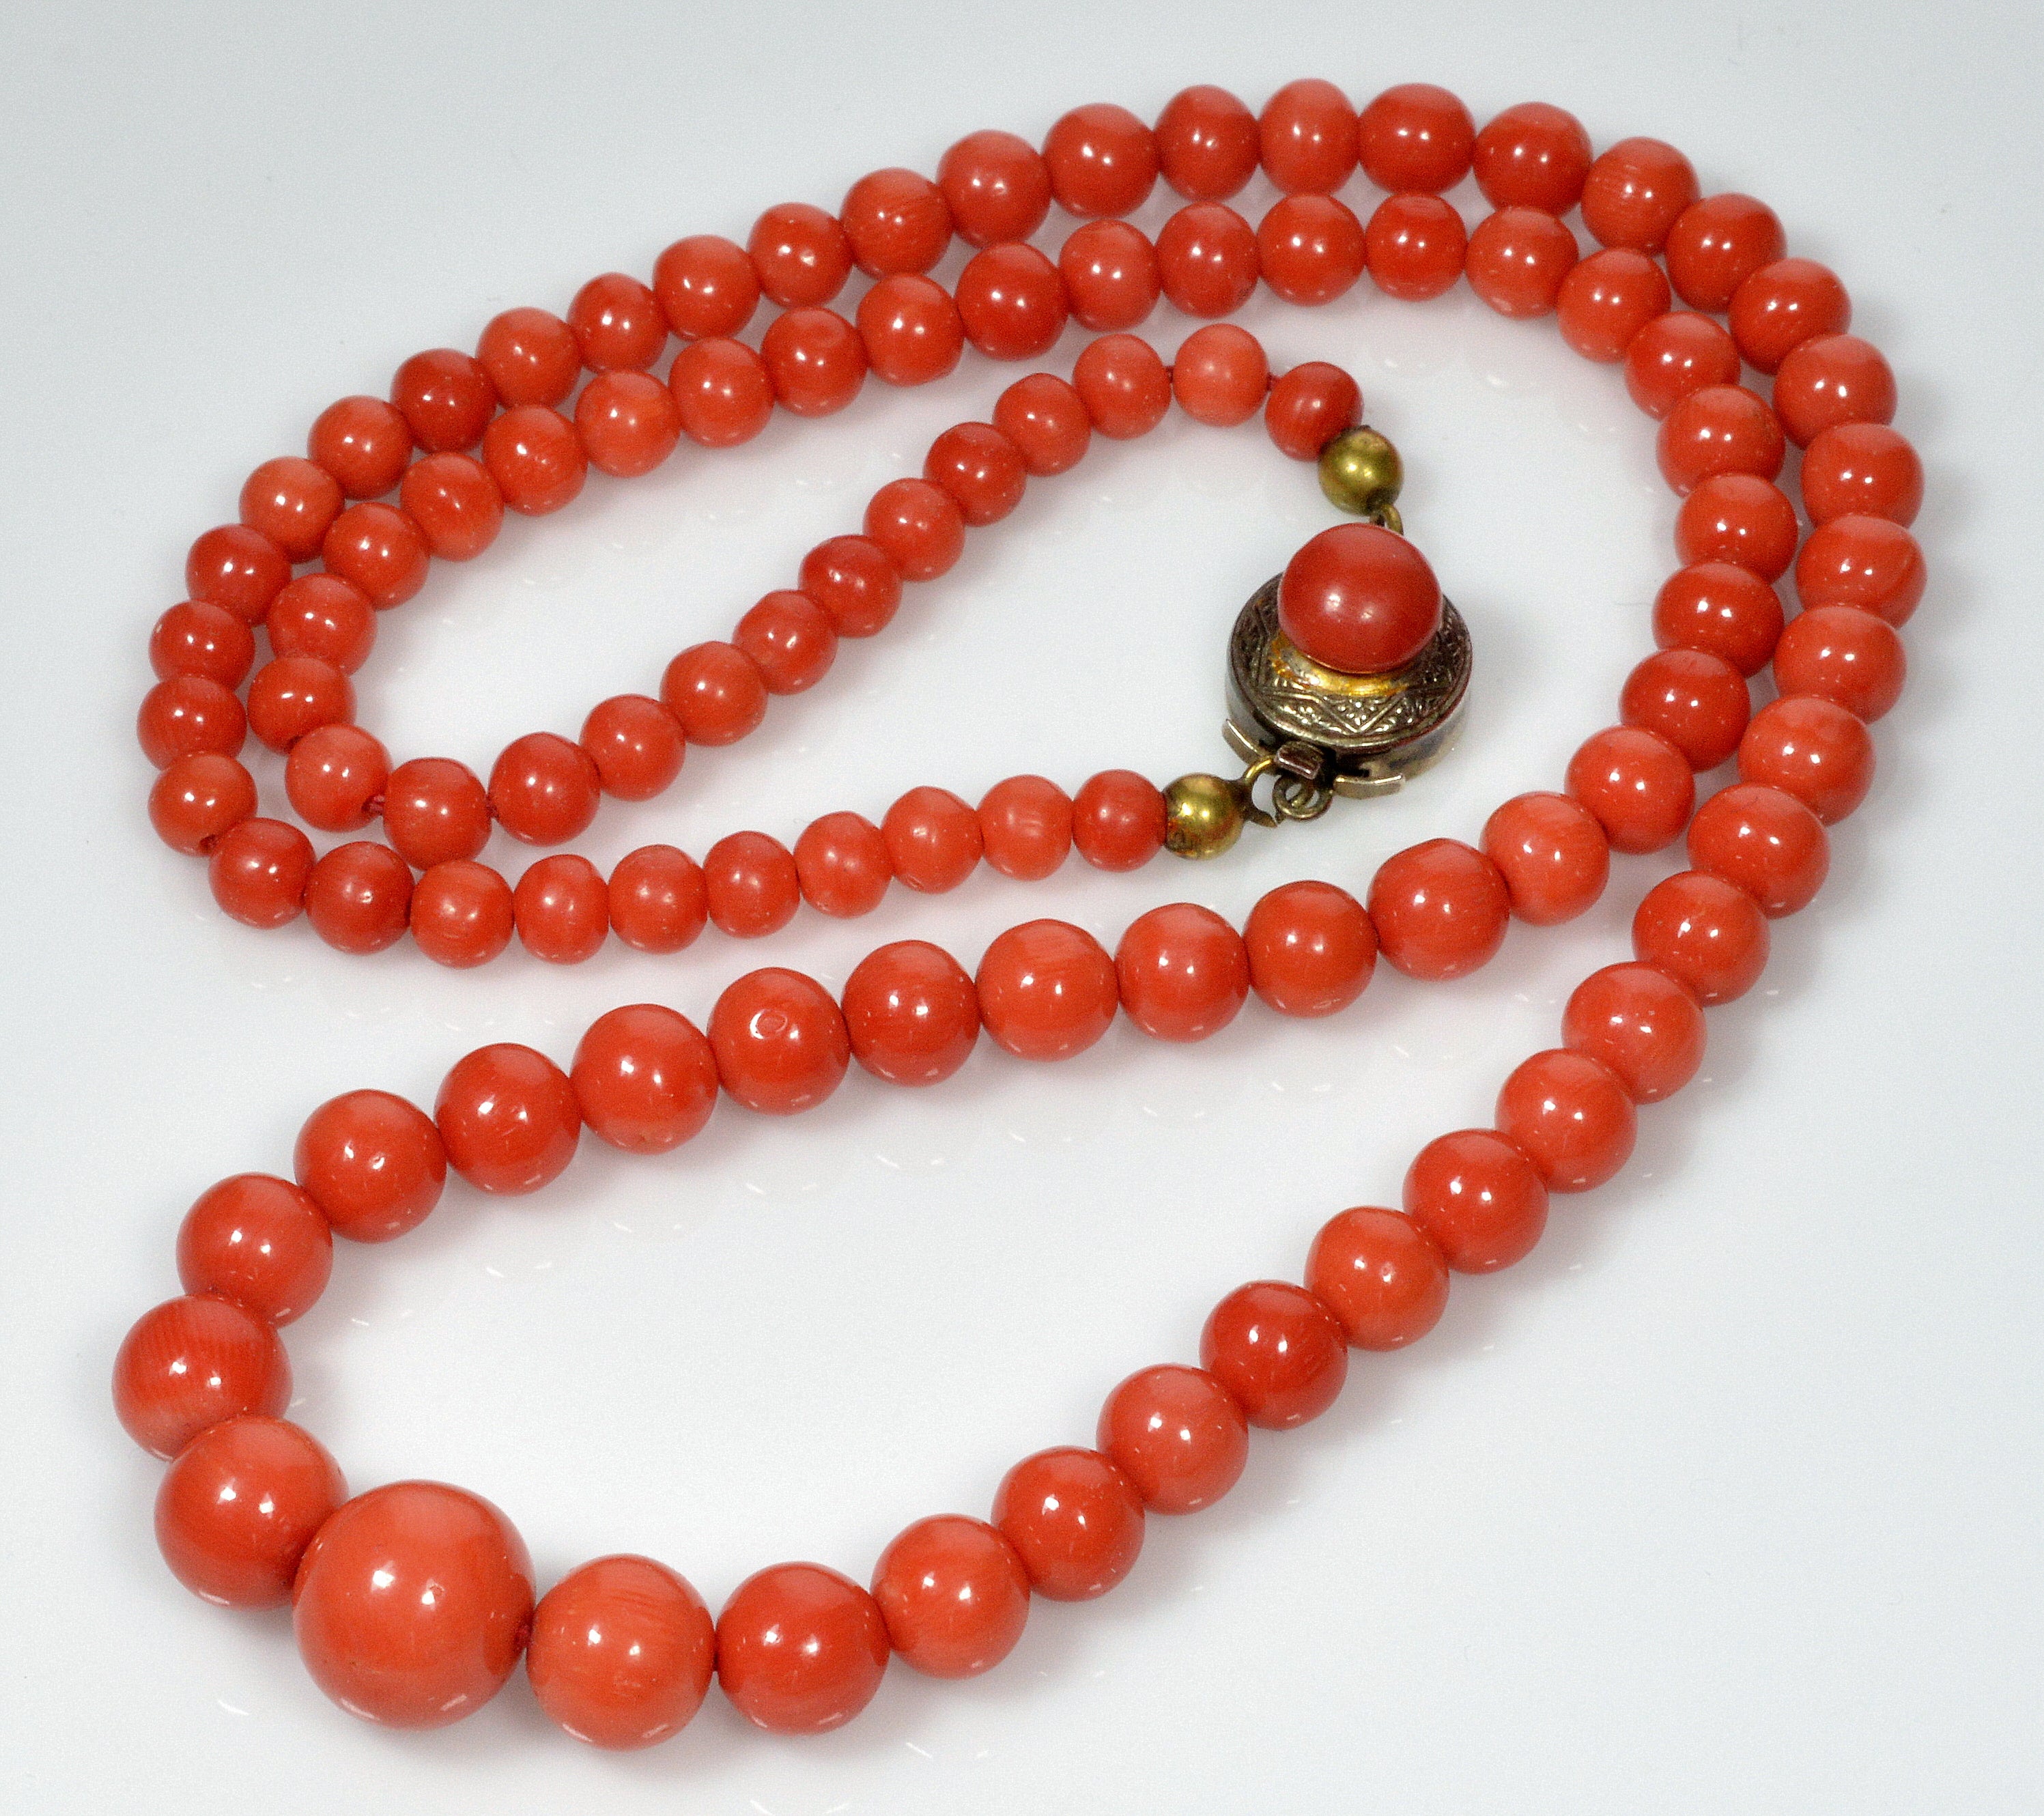 Vintage Coral Beads And Turquoise Necklace Silver Clasp | eBay